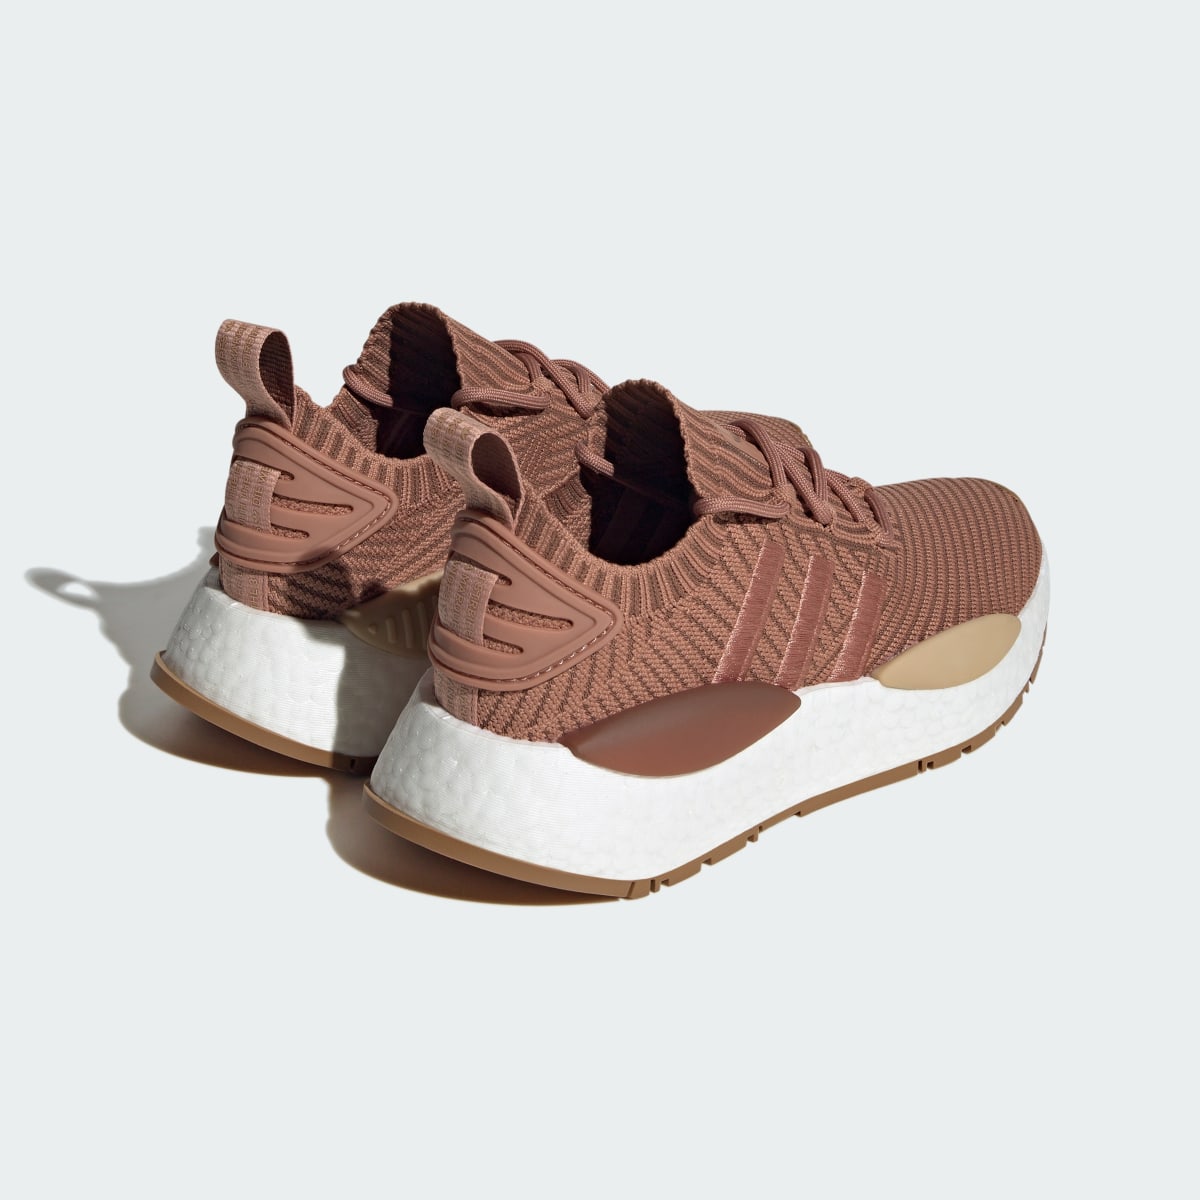 Adidas NMD_W1 Shoes. 6